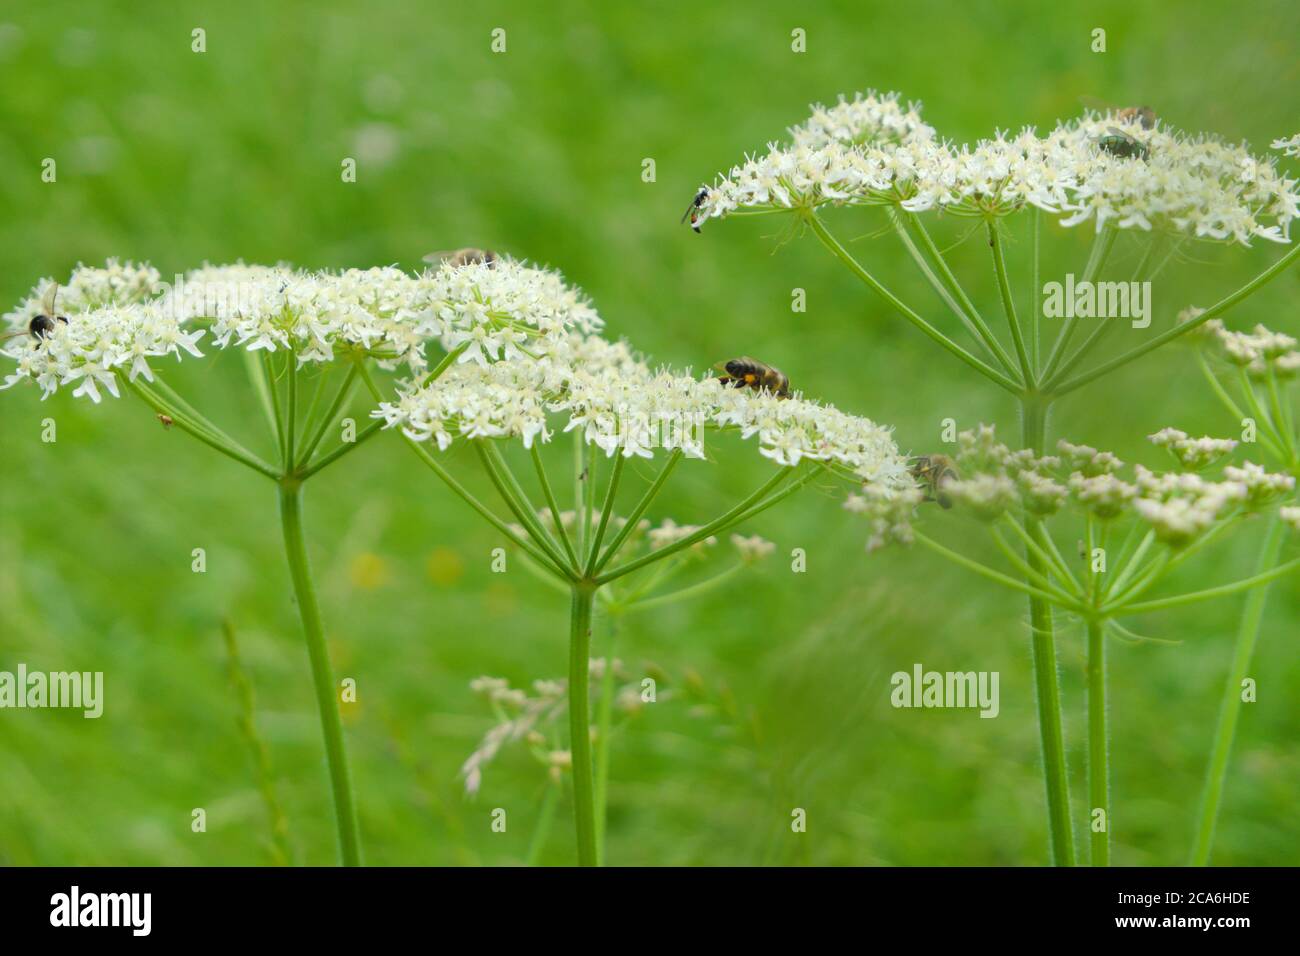 Insects on top of a Wild white European flower Cow parsley, iunder the sun in the summer scientific name Anthriscus sylvestris Stock Photo